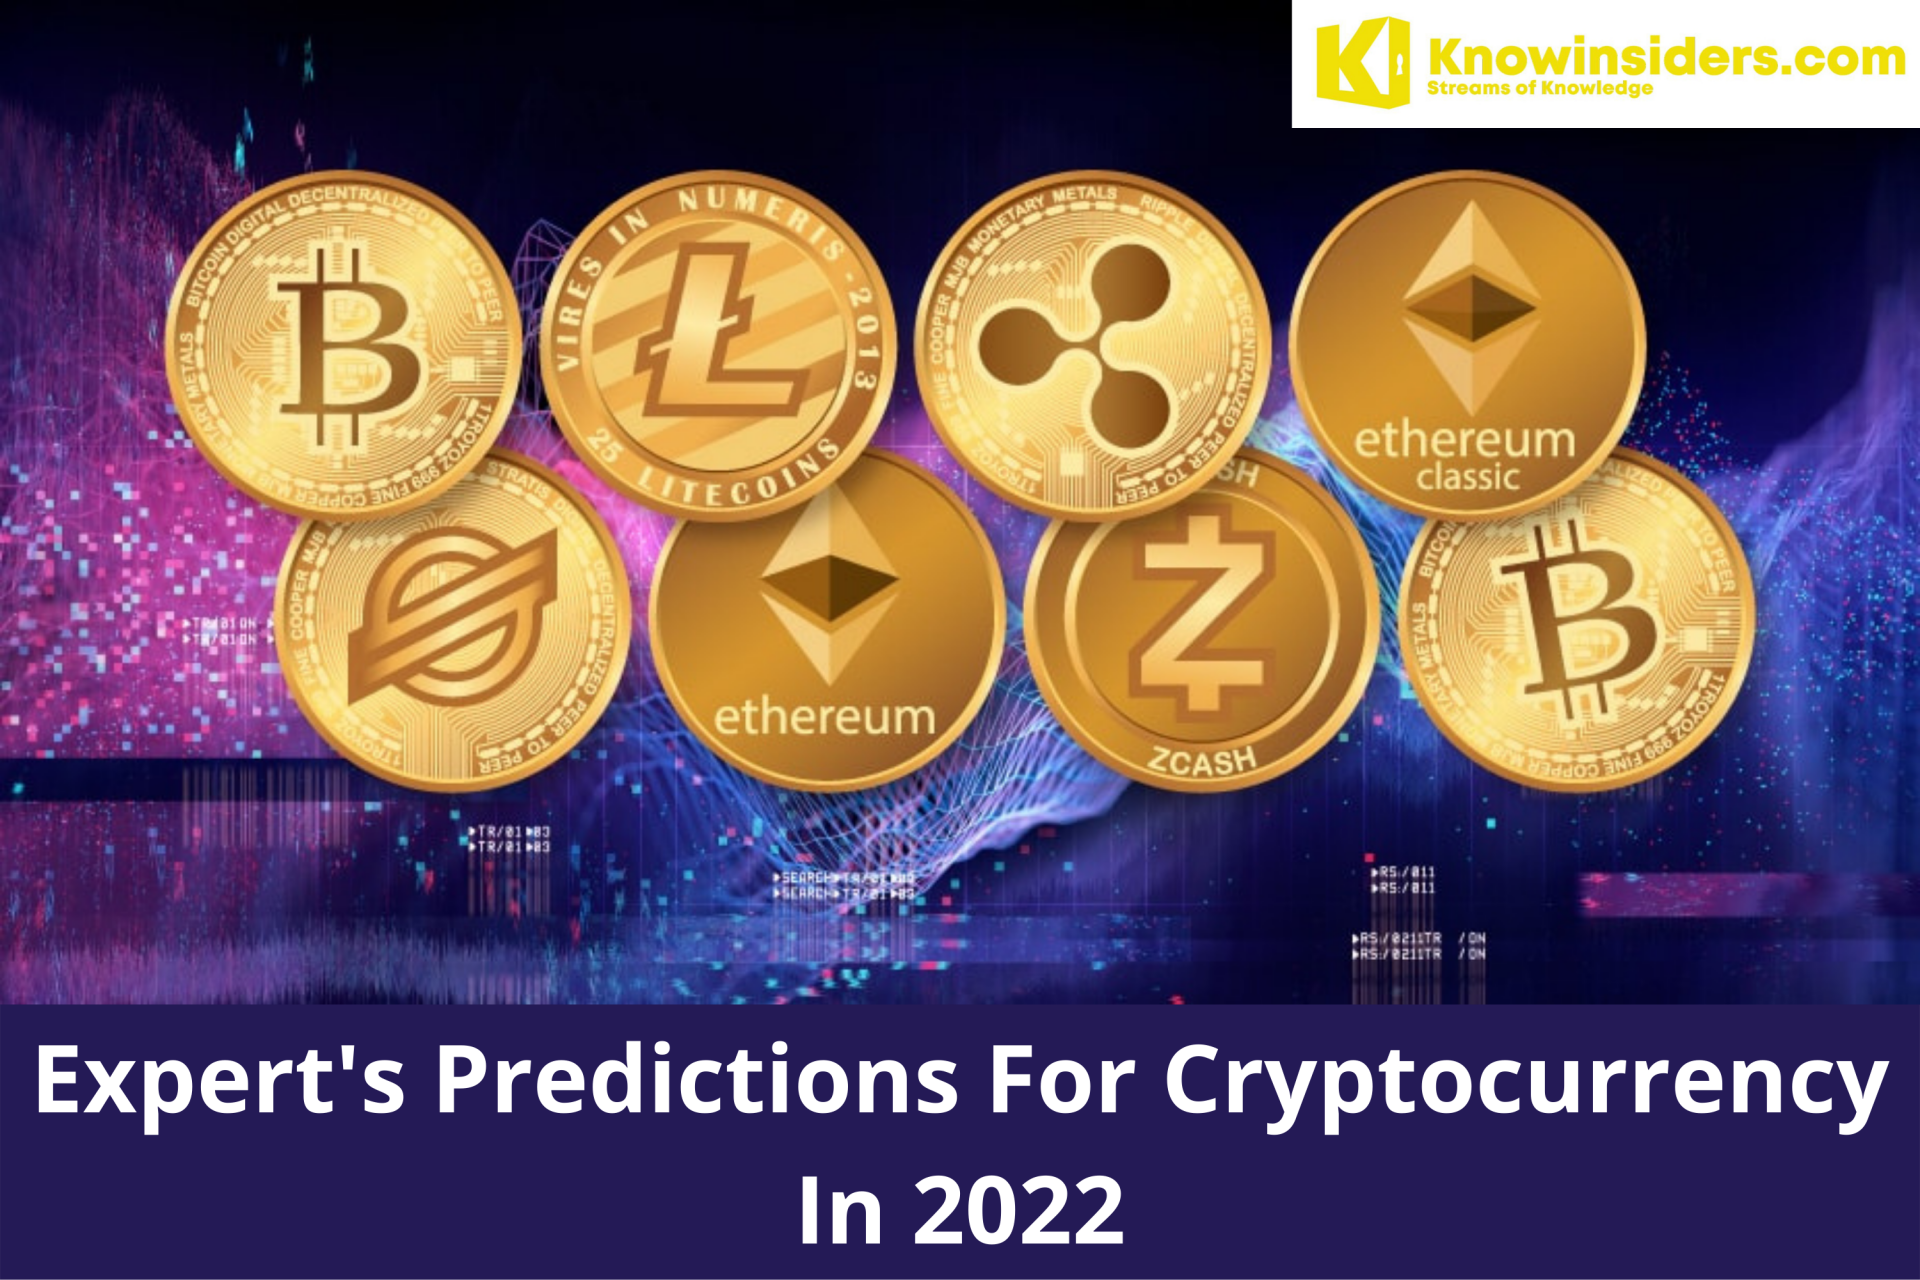 Expert's Predictions For Cryptocurrency In 2022